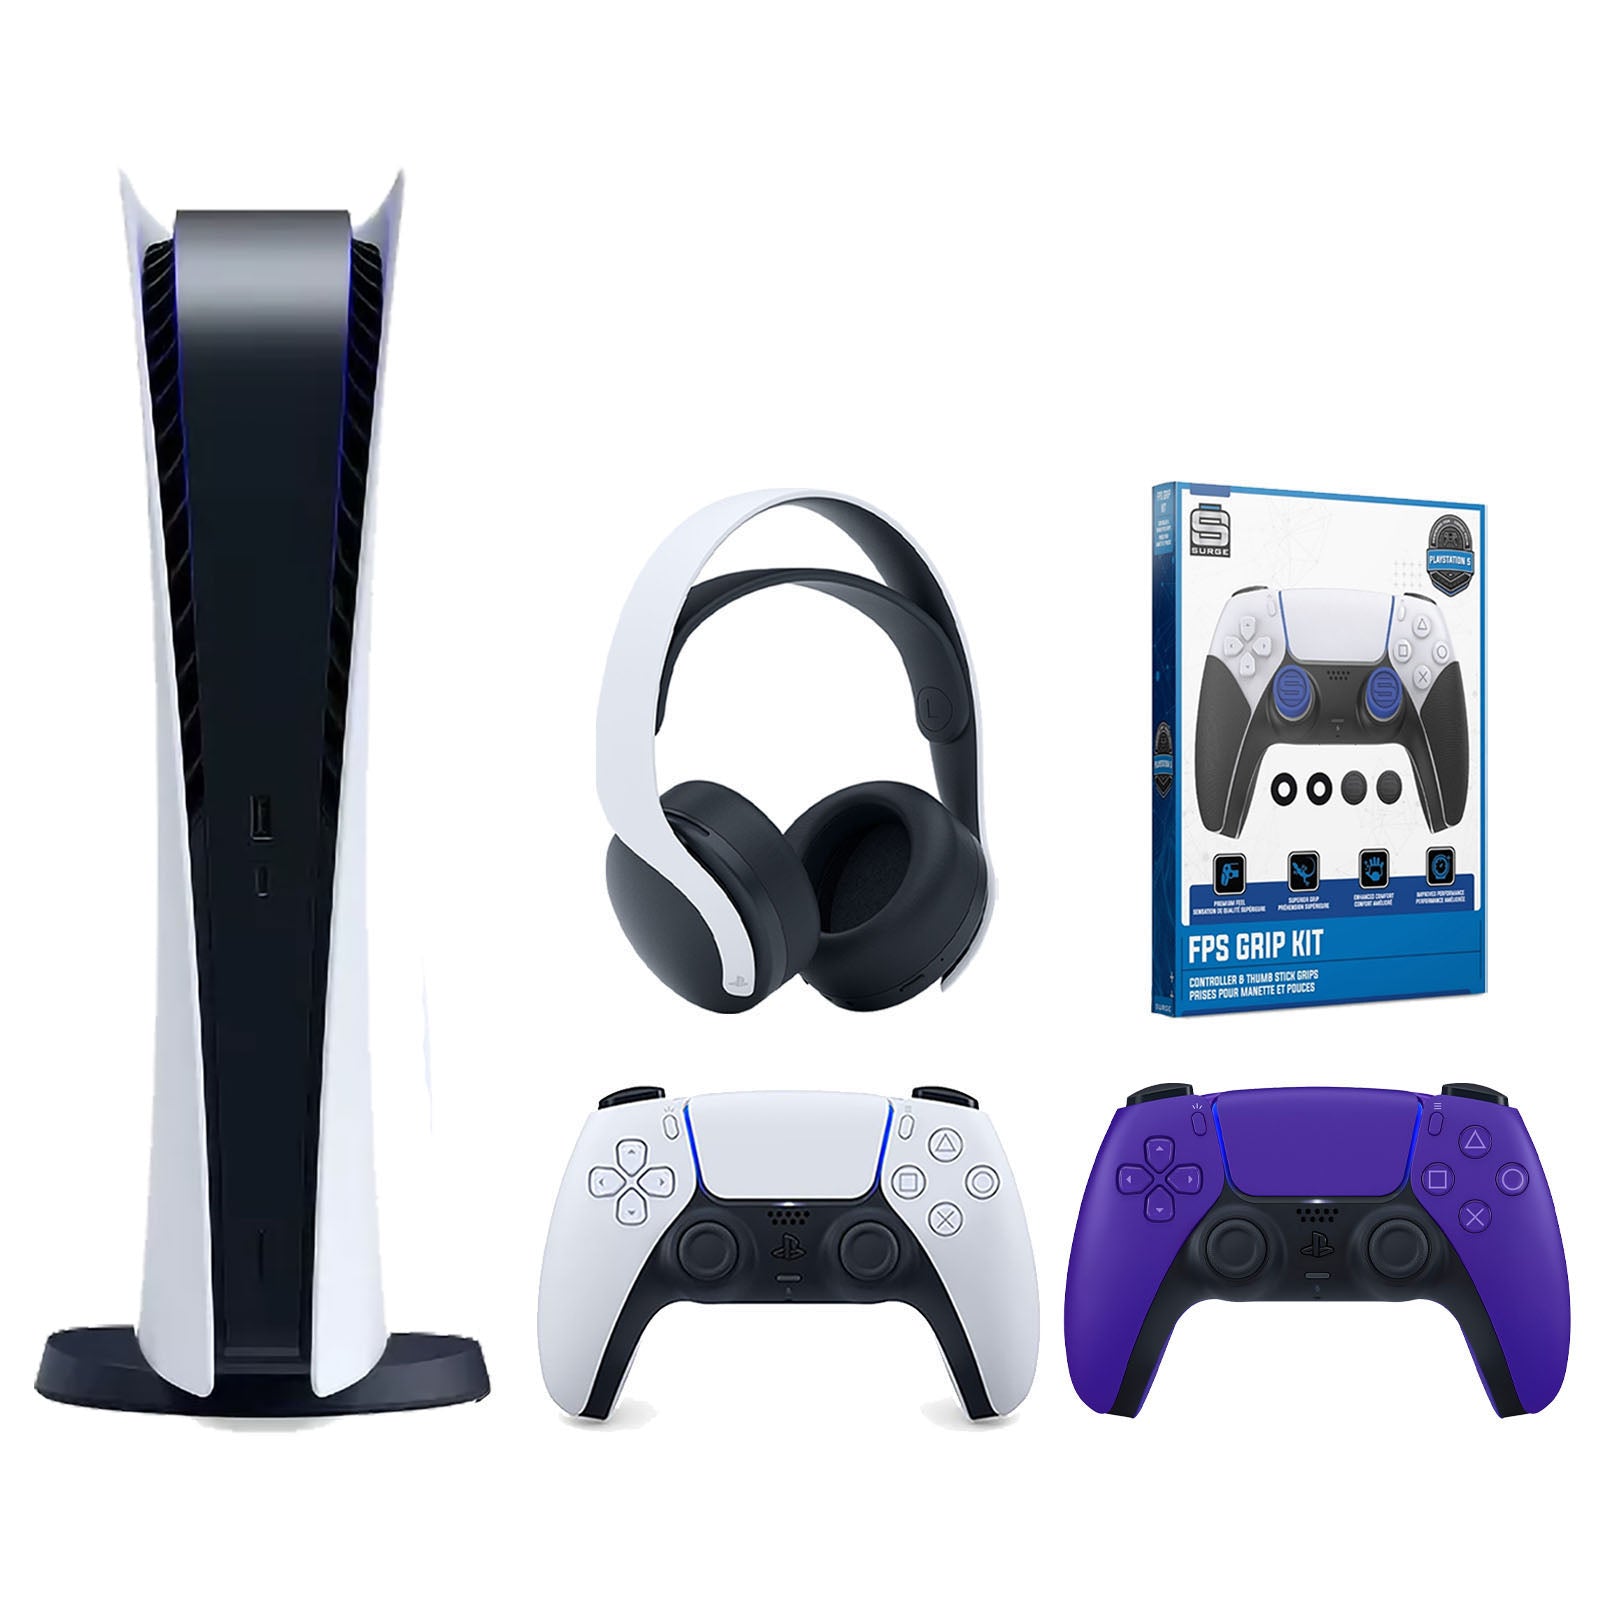 Sony Playstation 5 Digital Edition Console with Extra Purple Controller, White PULSE 3D Headset and Surge FPS Grip Kit With Precision Aiming Rings Bundle - Pro-Distributing